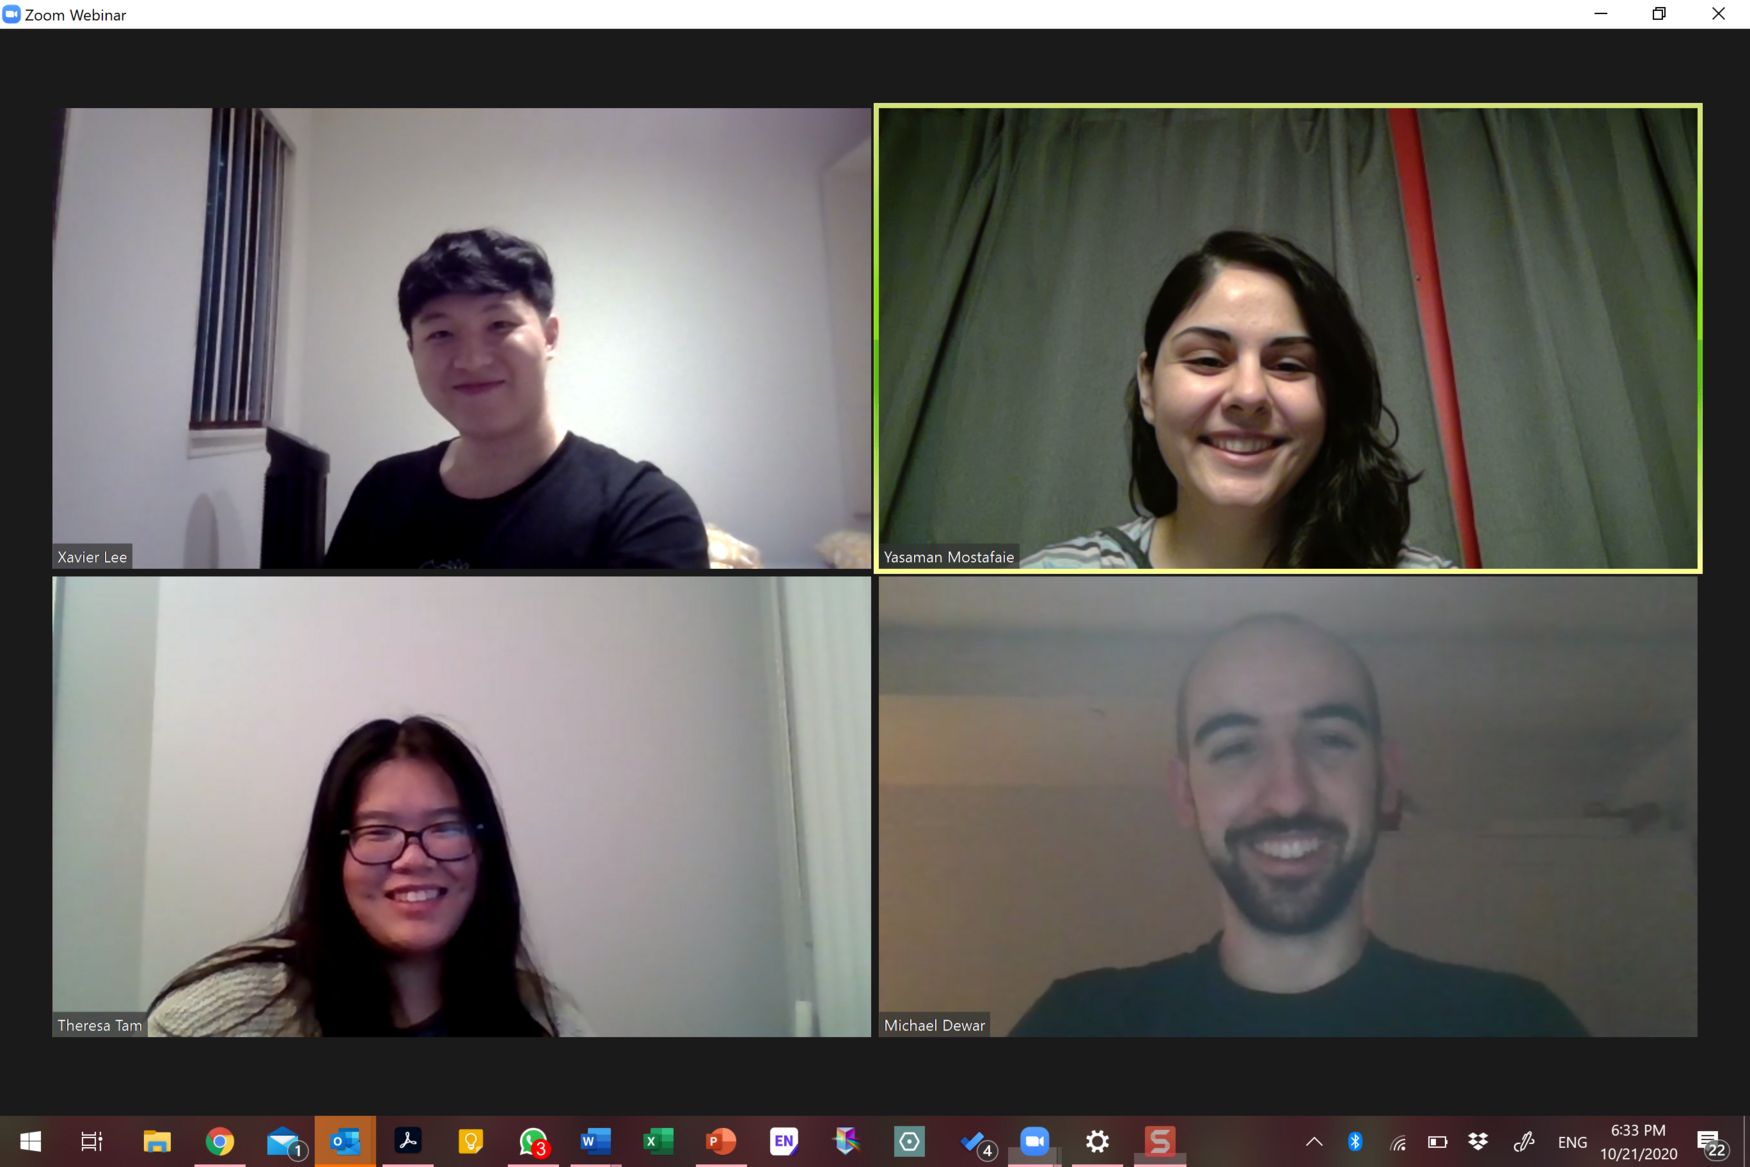 screen shot of planning committee co-chairs in a zoom meeting